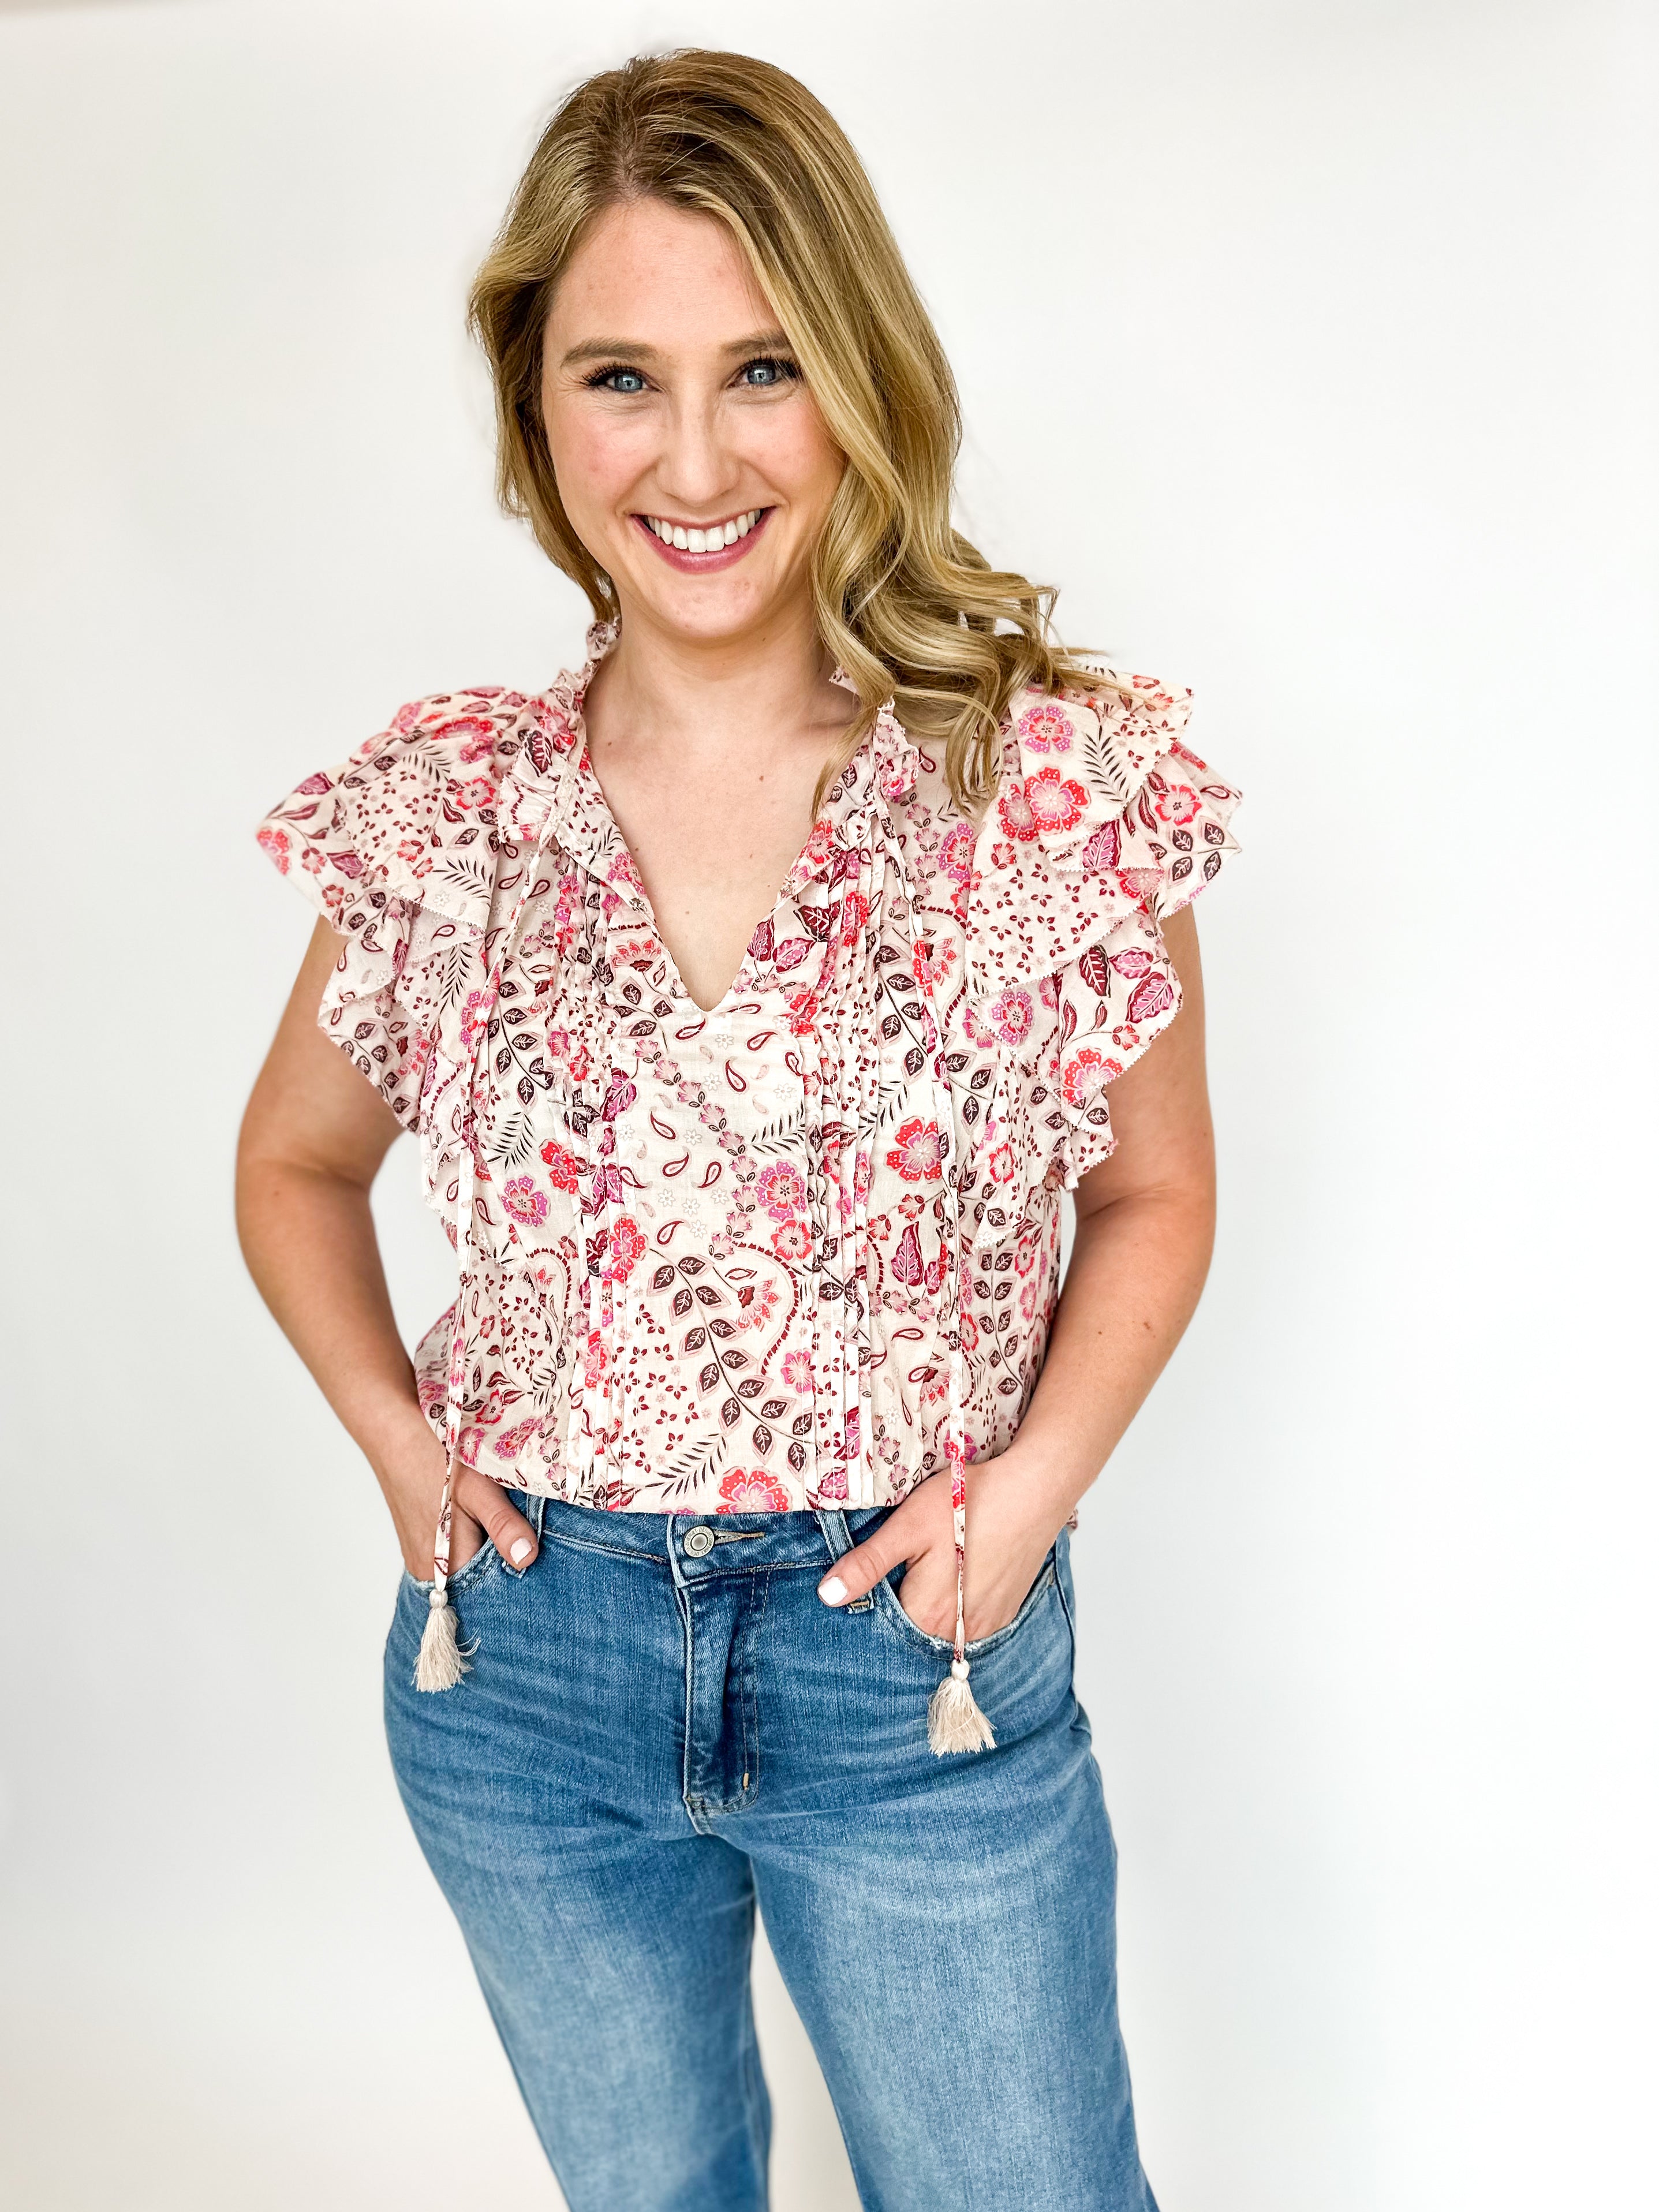 Cream & Pink Floral Blouse-200 Fashion Blouses-OLIVACEOUS-July & June Women's Fashion Boutique Located in San Antonio, Texas